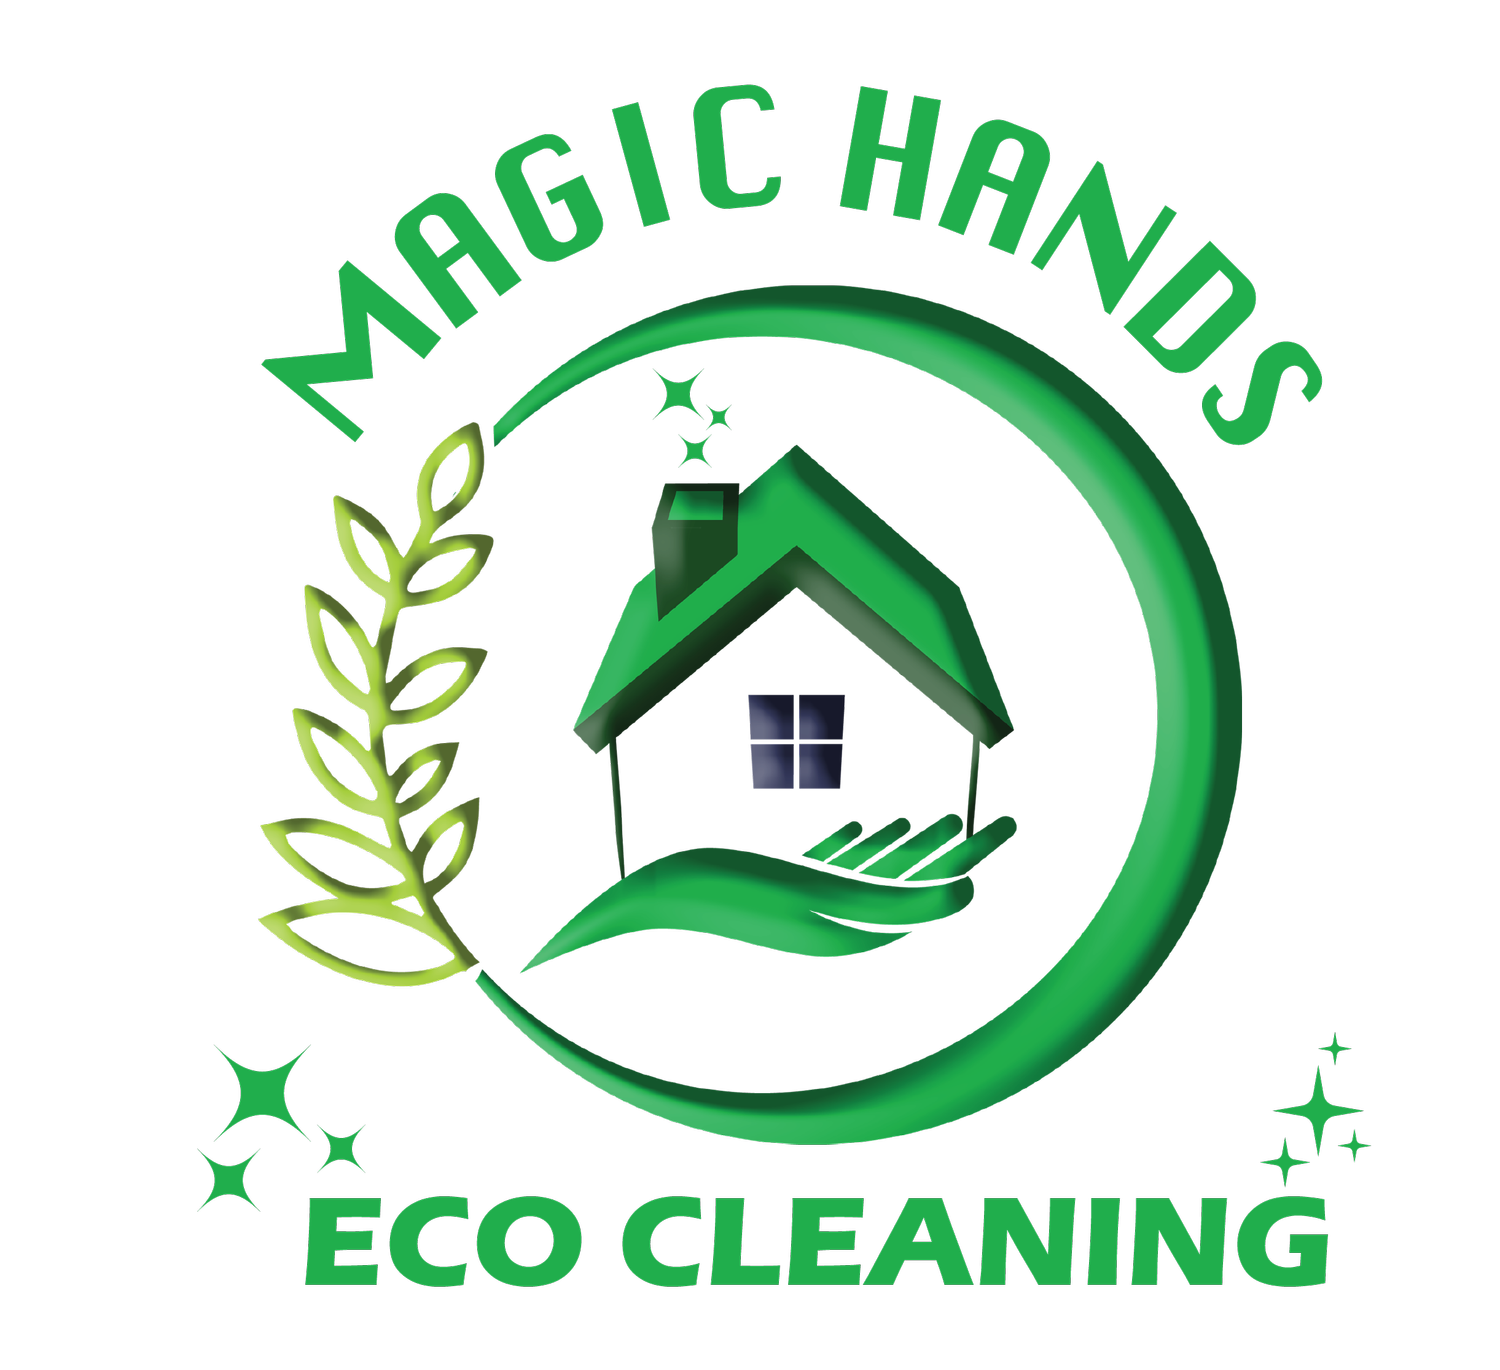 Magic Hands Eco Cleaning